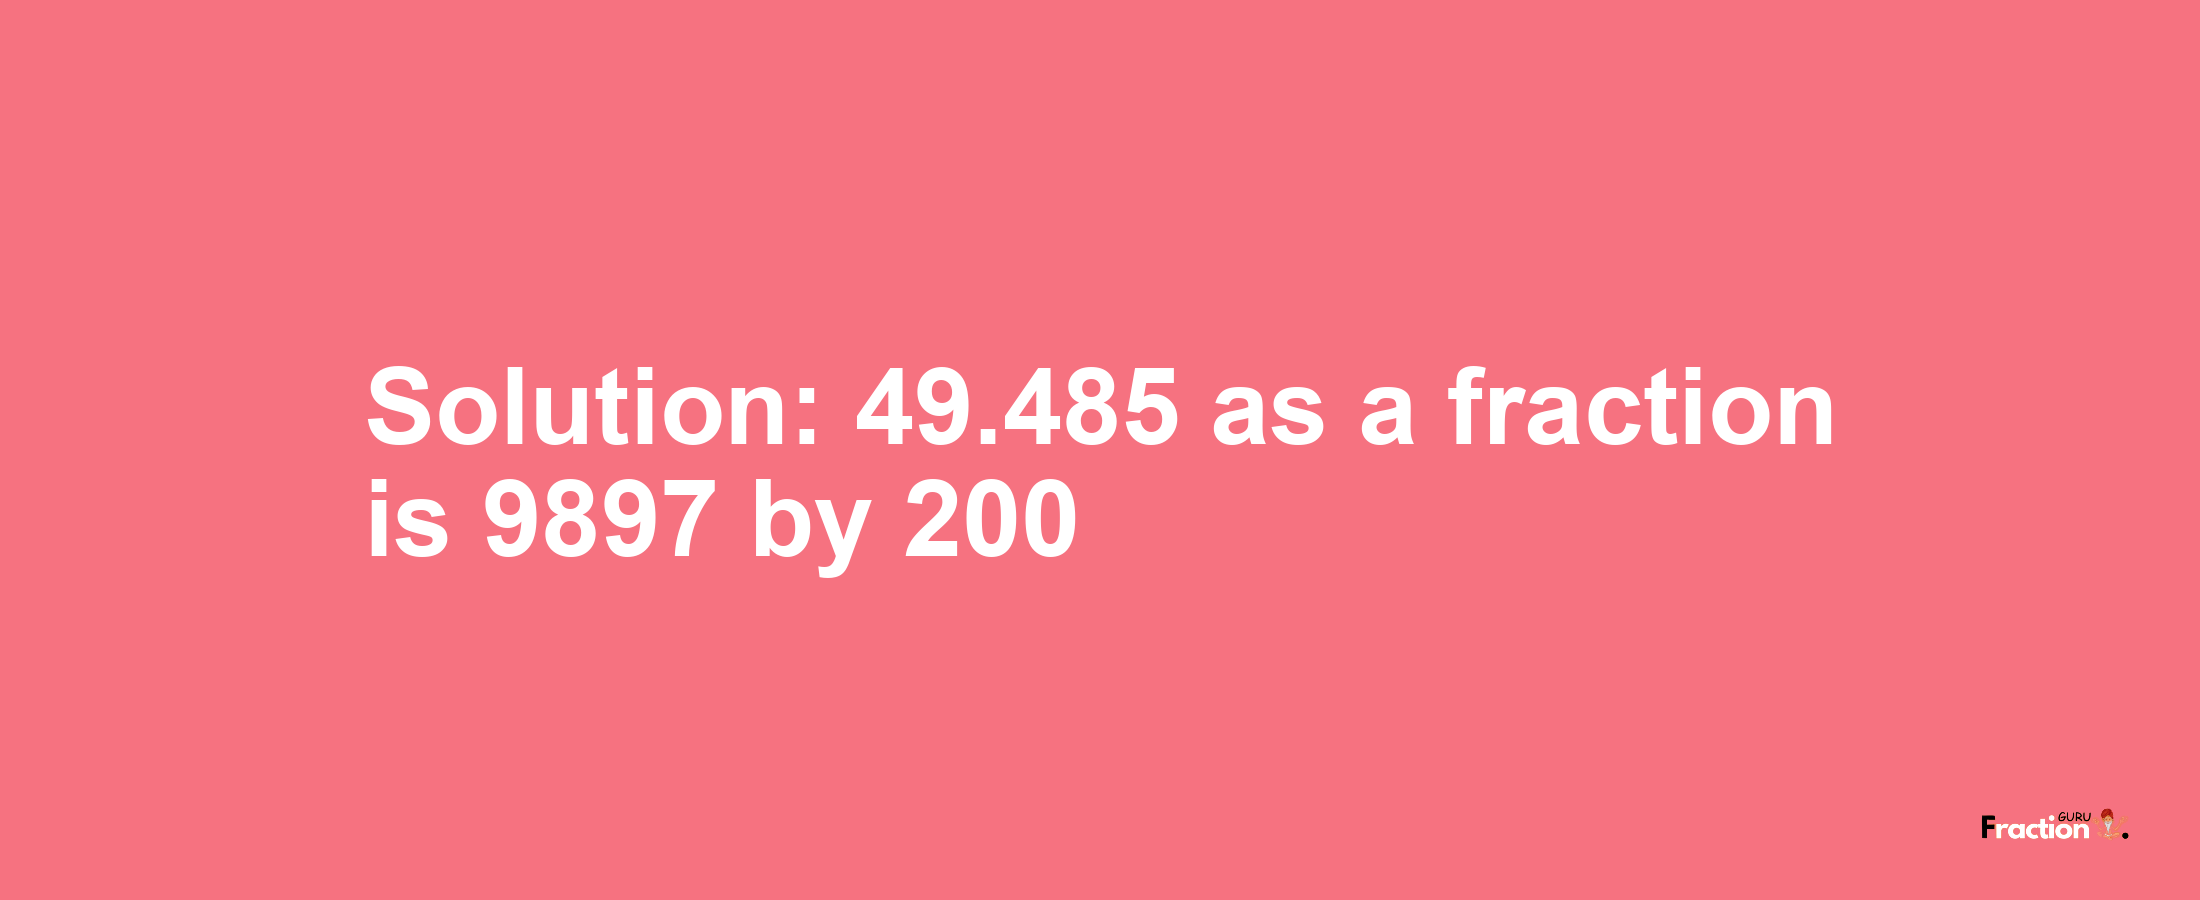 Solution:49.485 as a fraction is 9897/200